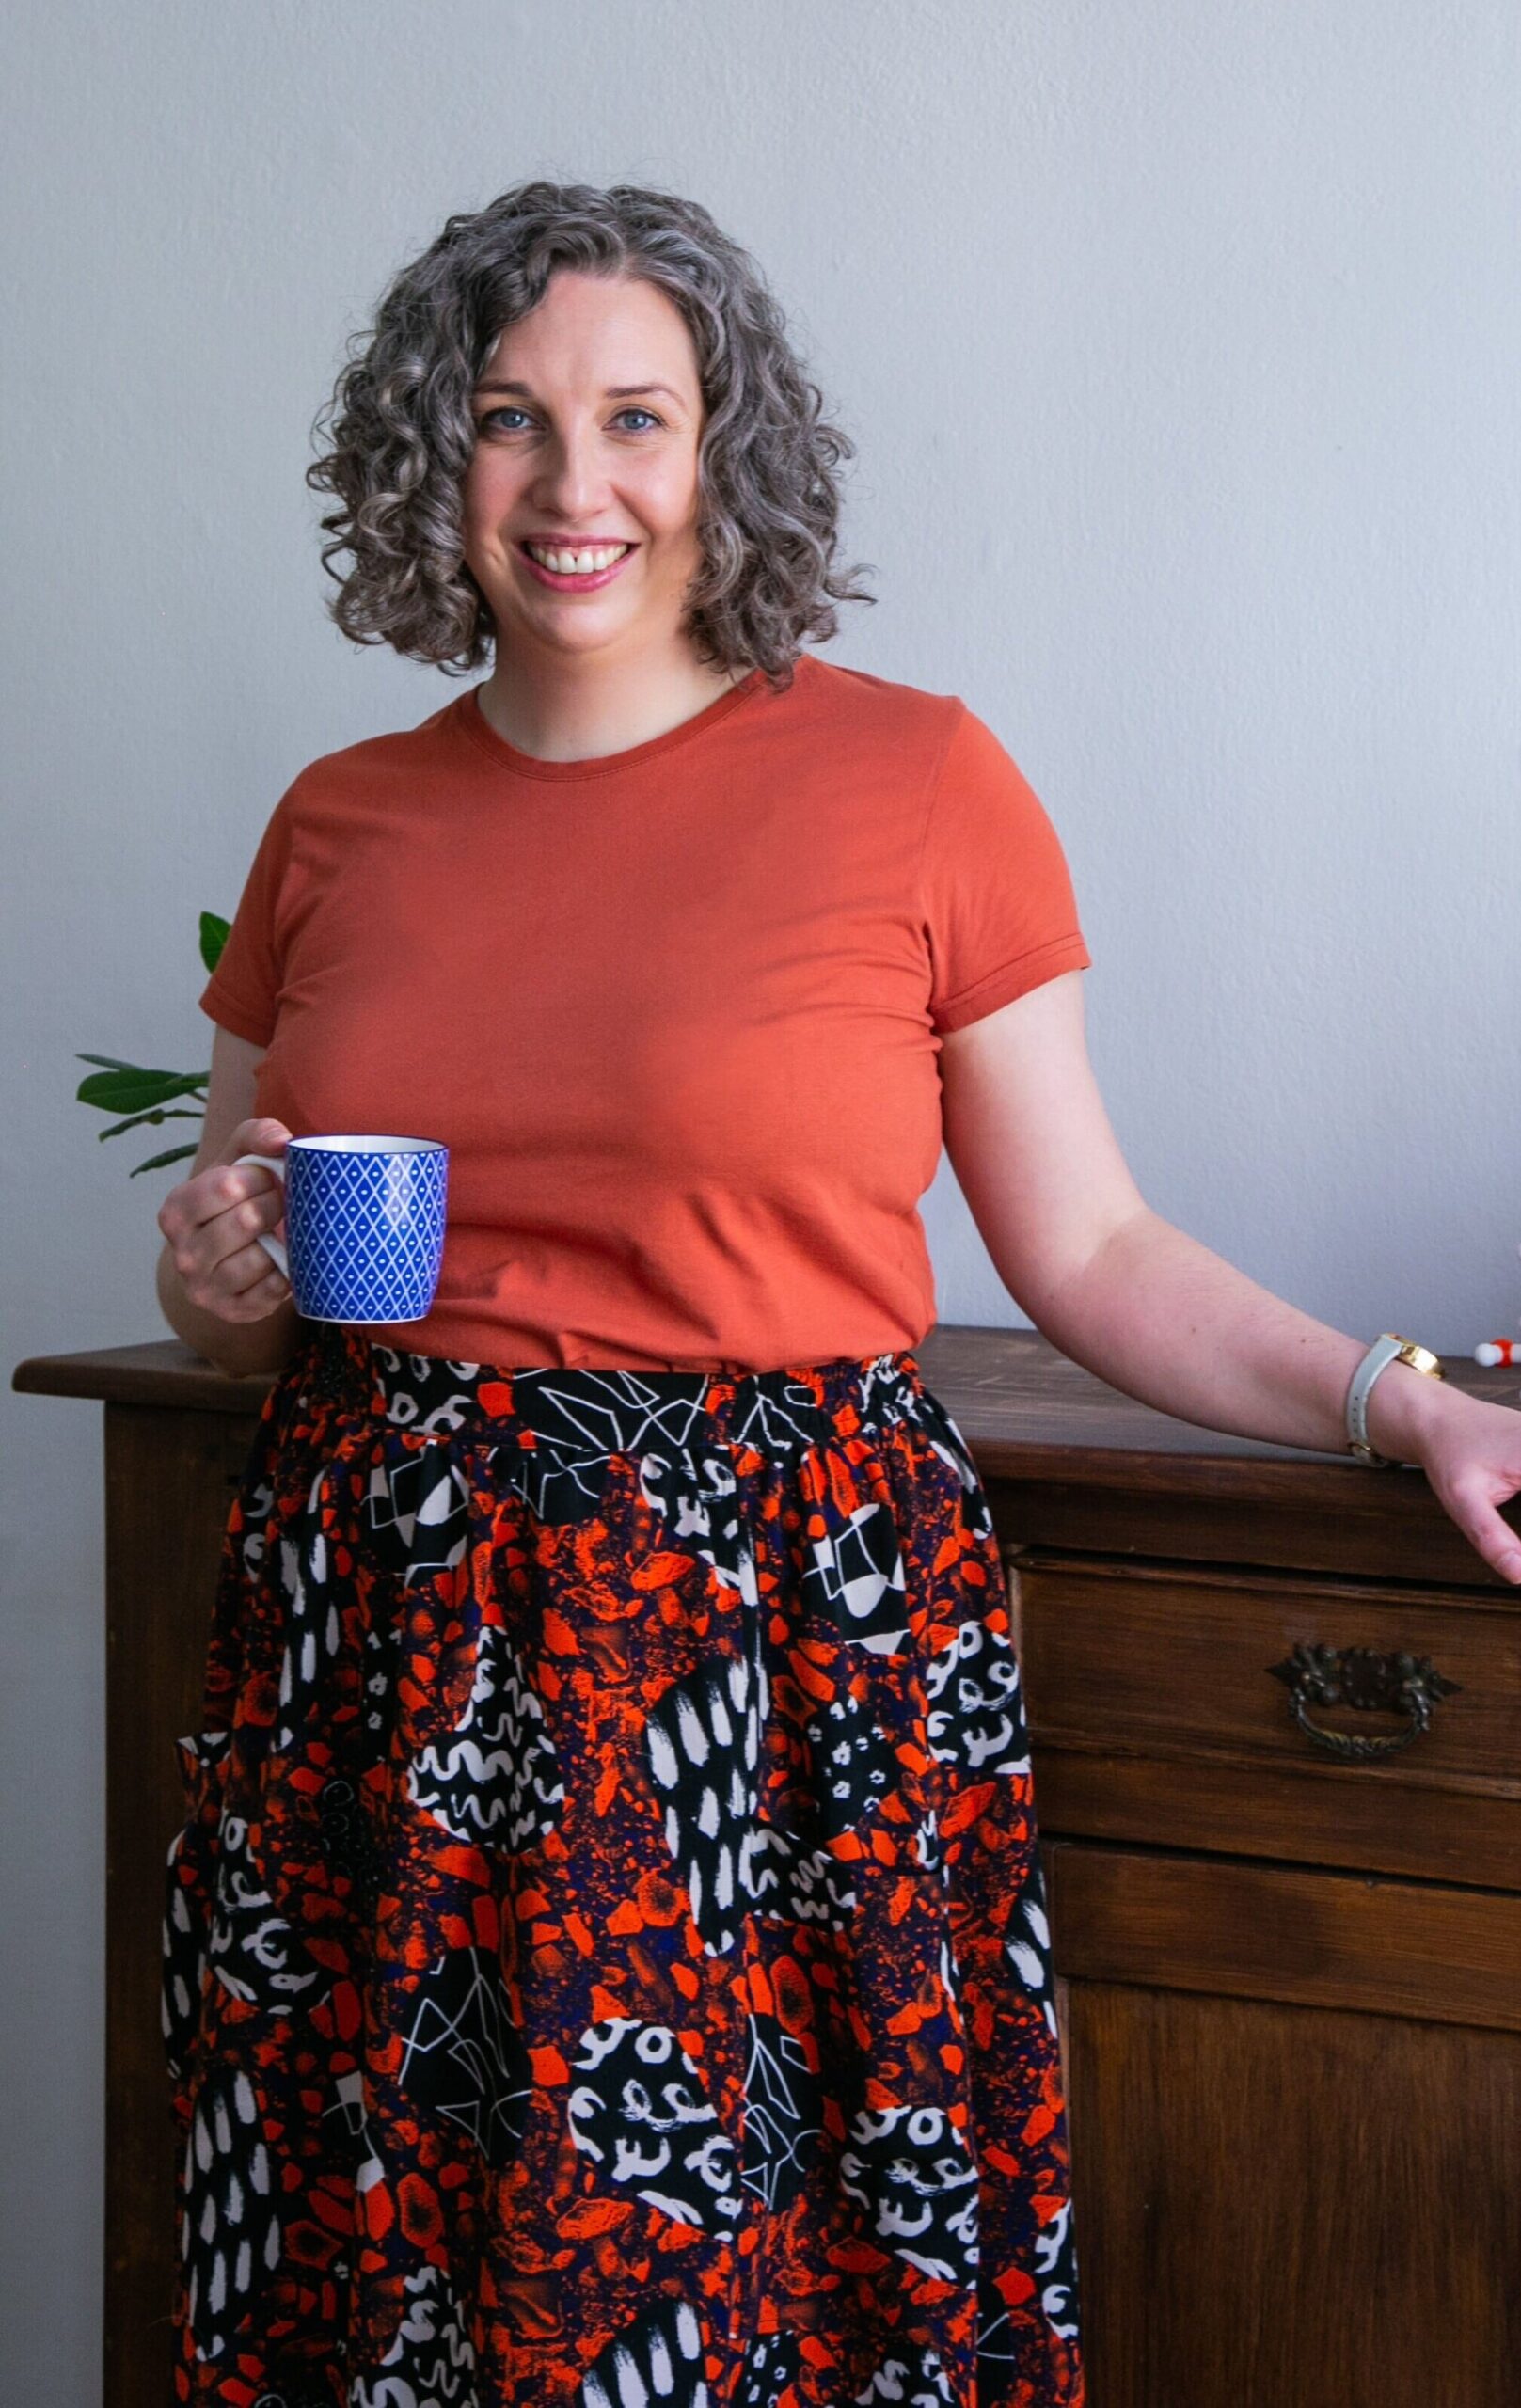 Dr Anna Clemens standing with her arm resting on a credenza, holding a mug.